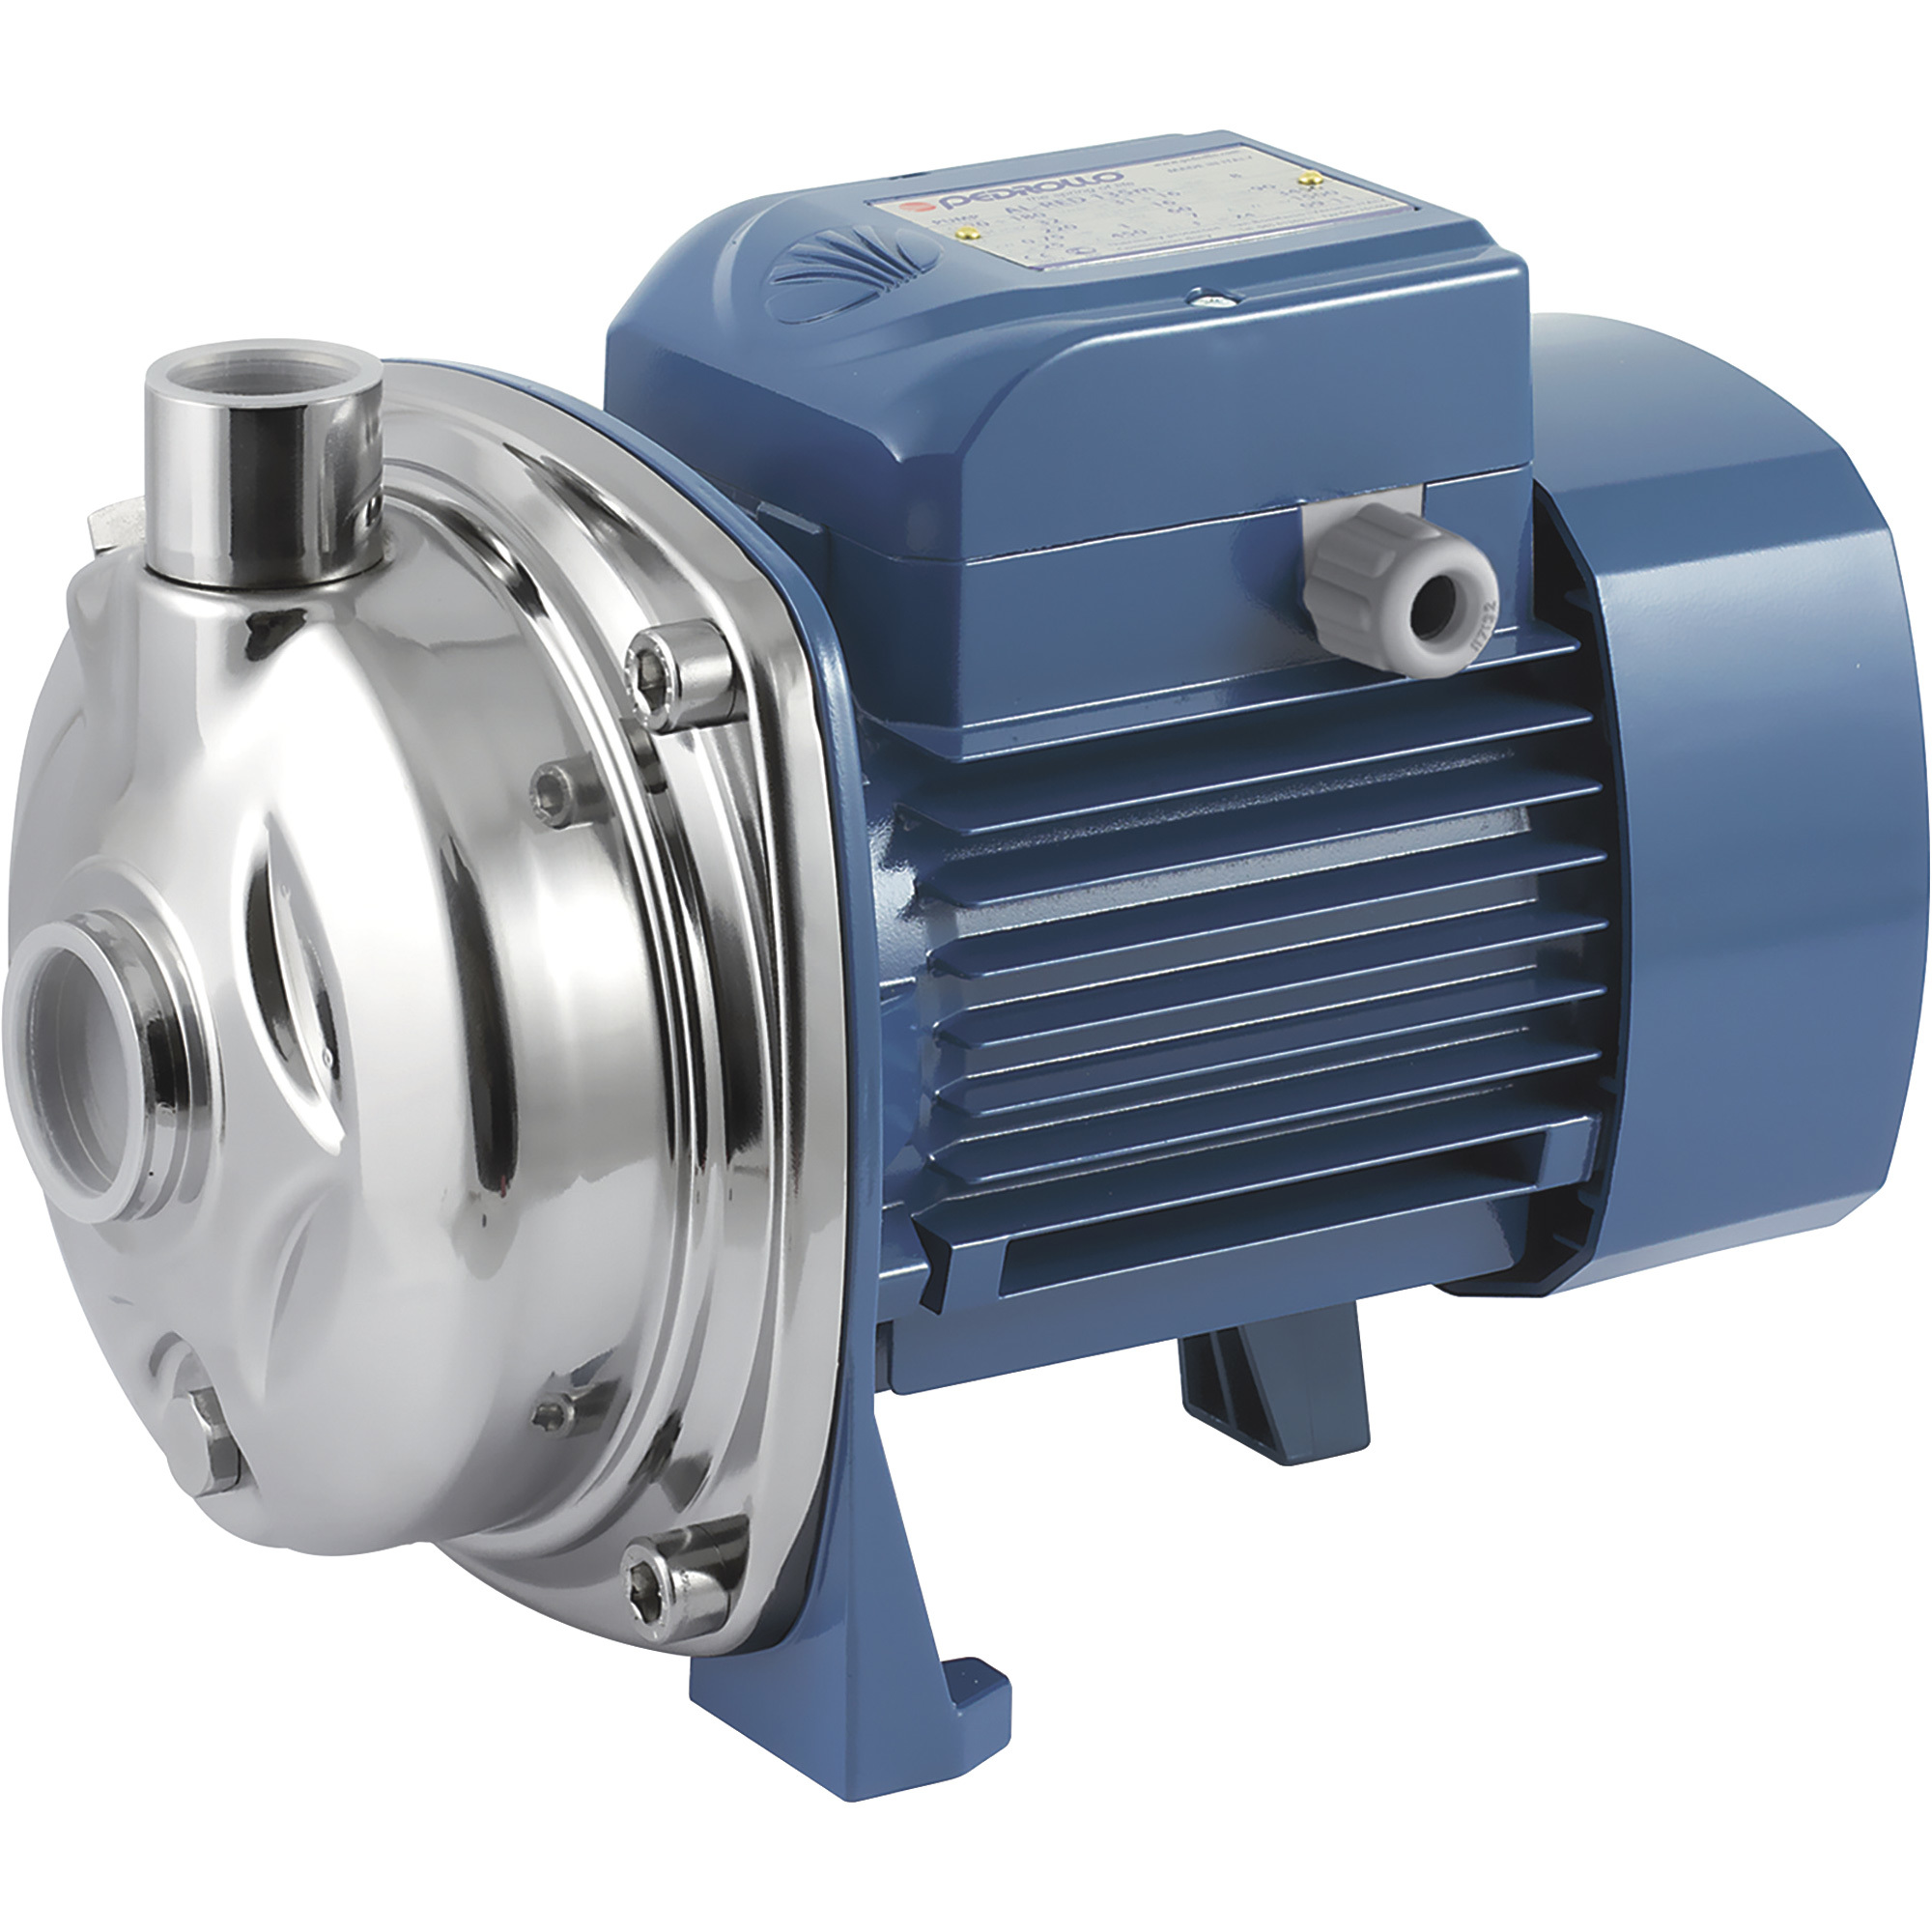 Pedrollo Centrifugal Stainless Steel Water Pump â 2,853 GPH, 1 HP, 115 Volts, Model AL- RED 135m